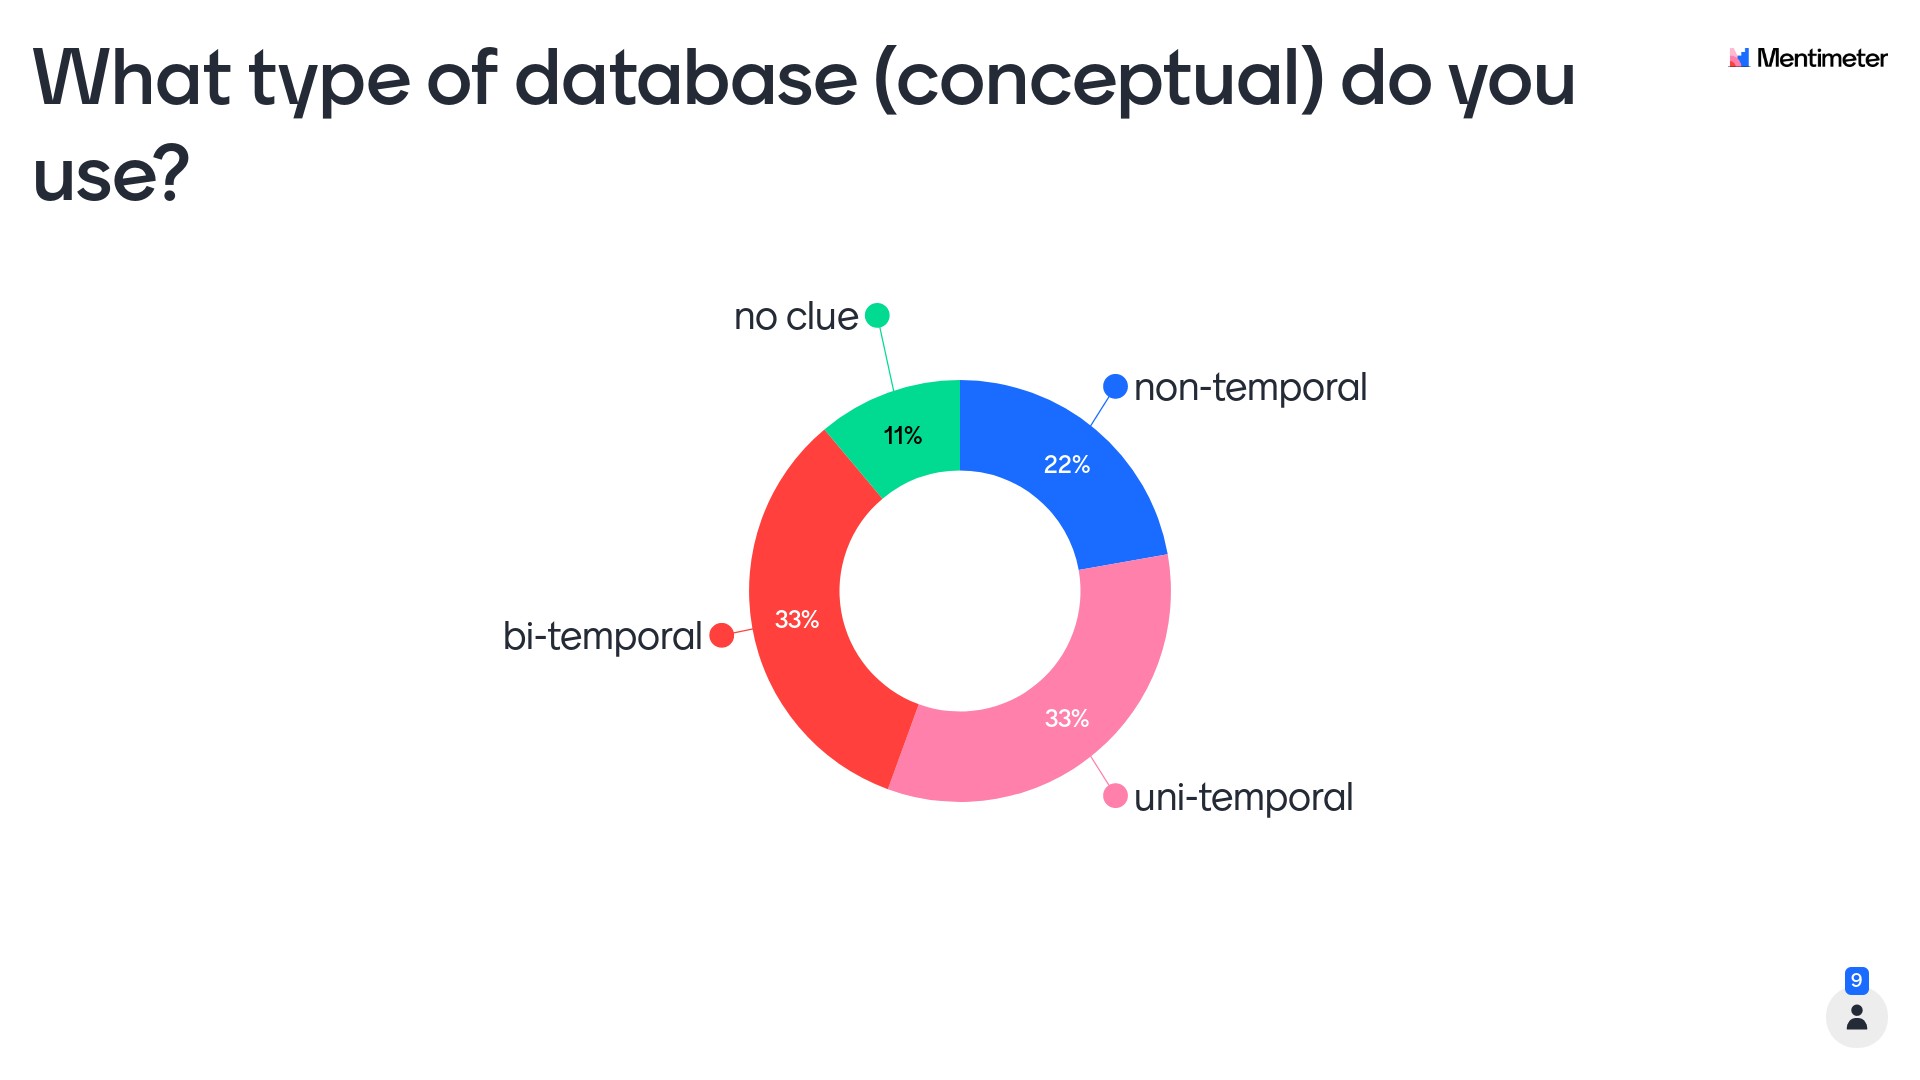 What type of database conceptual do you use?